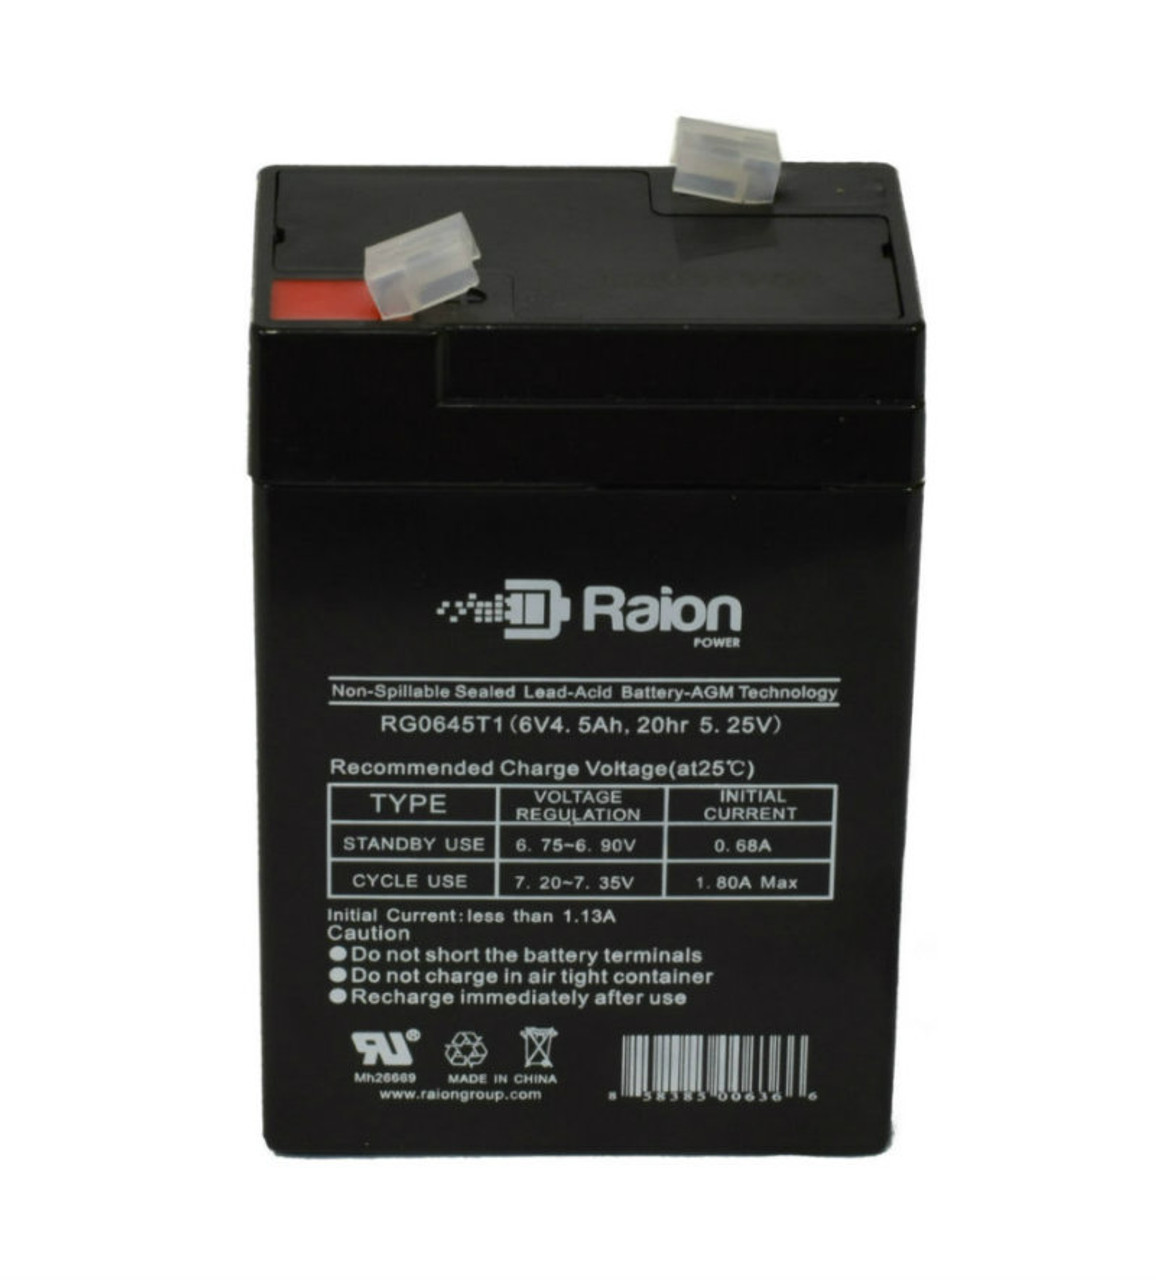 Raion Power RG0645T1 Replacement Battery Cartridge for Kalee KL40011F Classic Car (Remote Controlled)